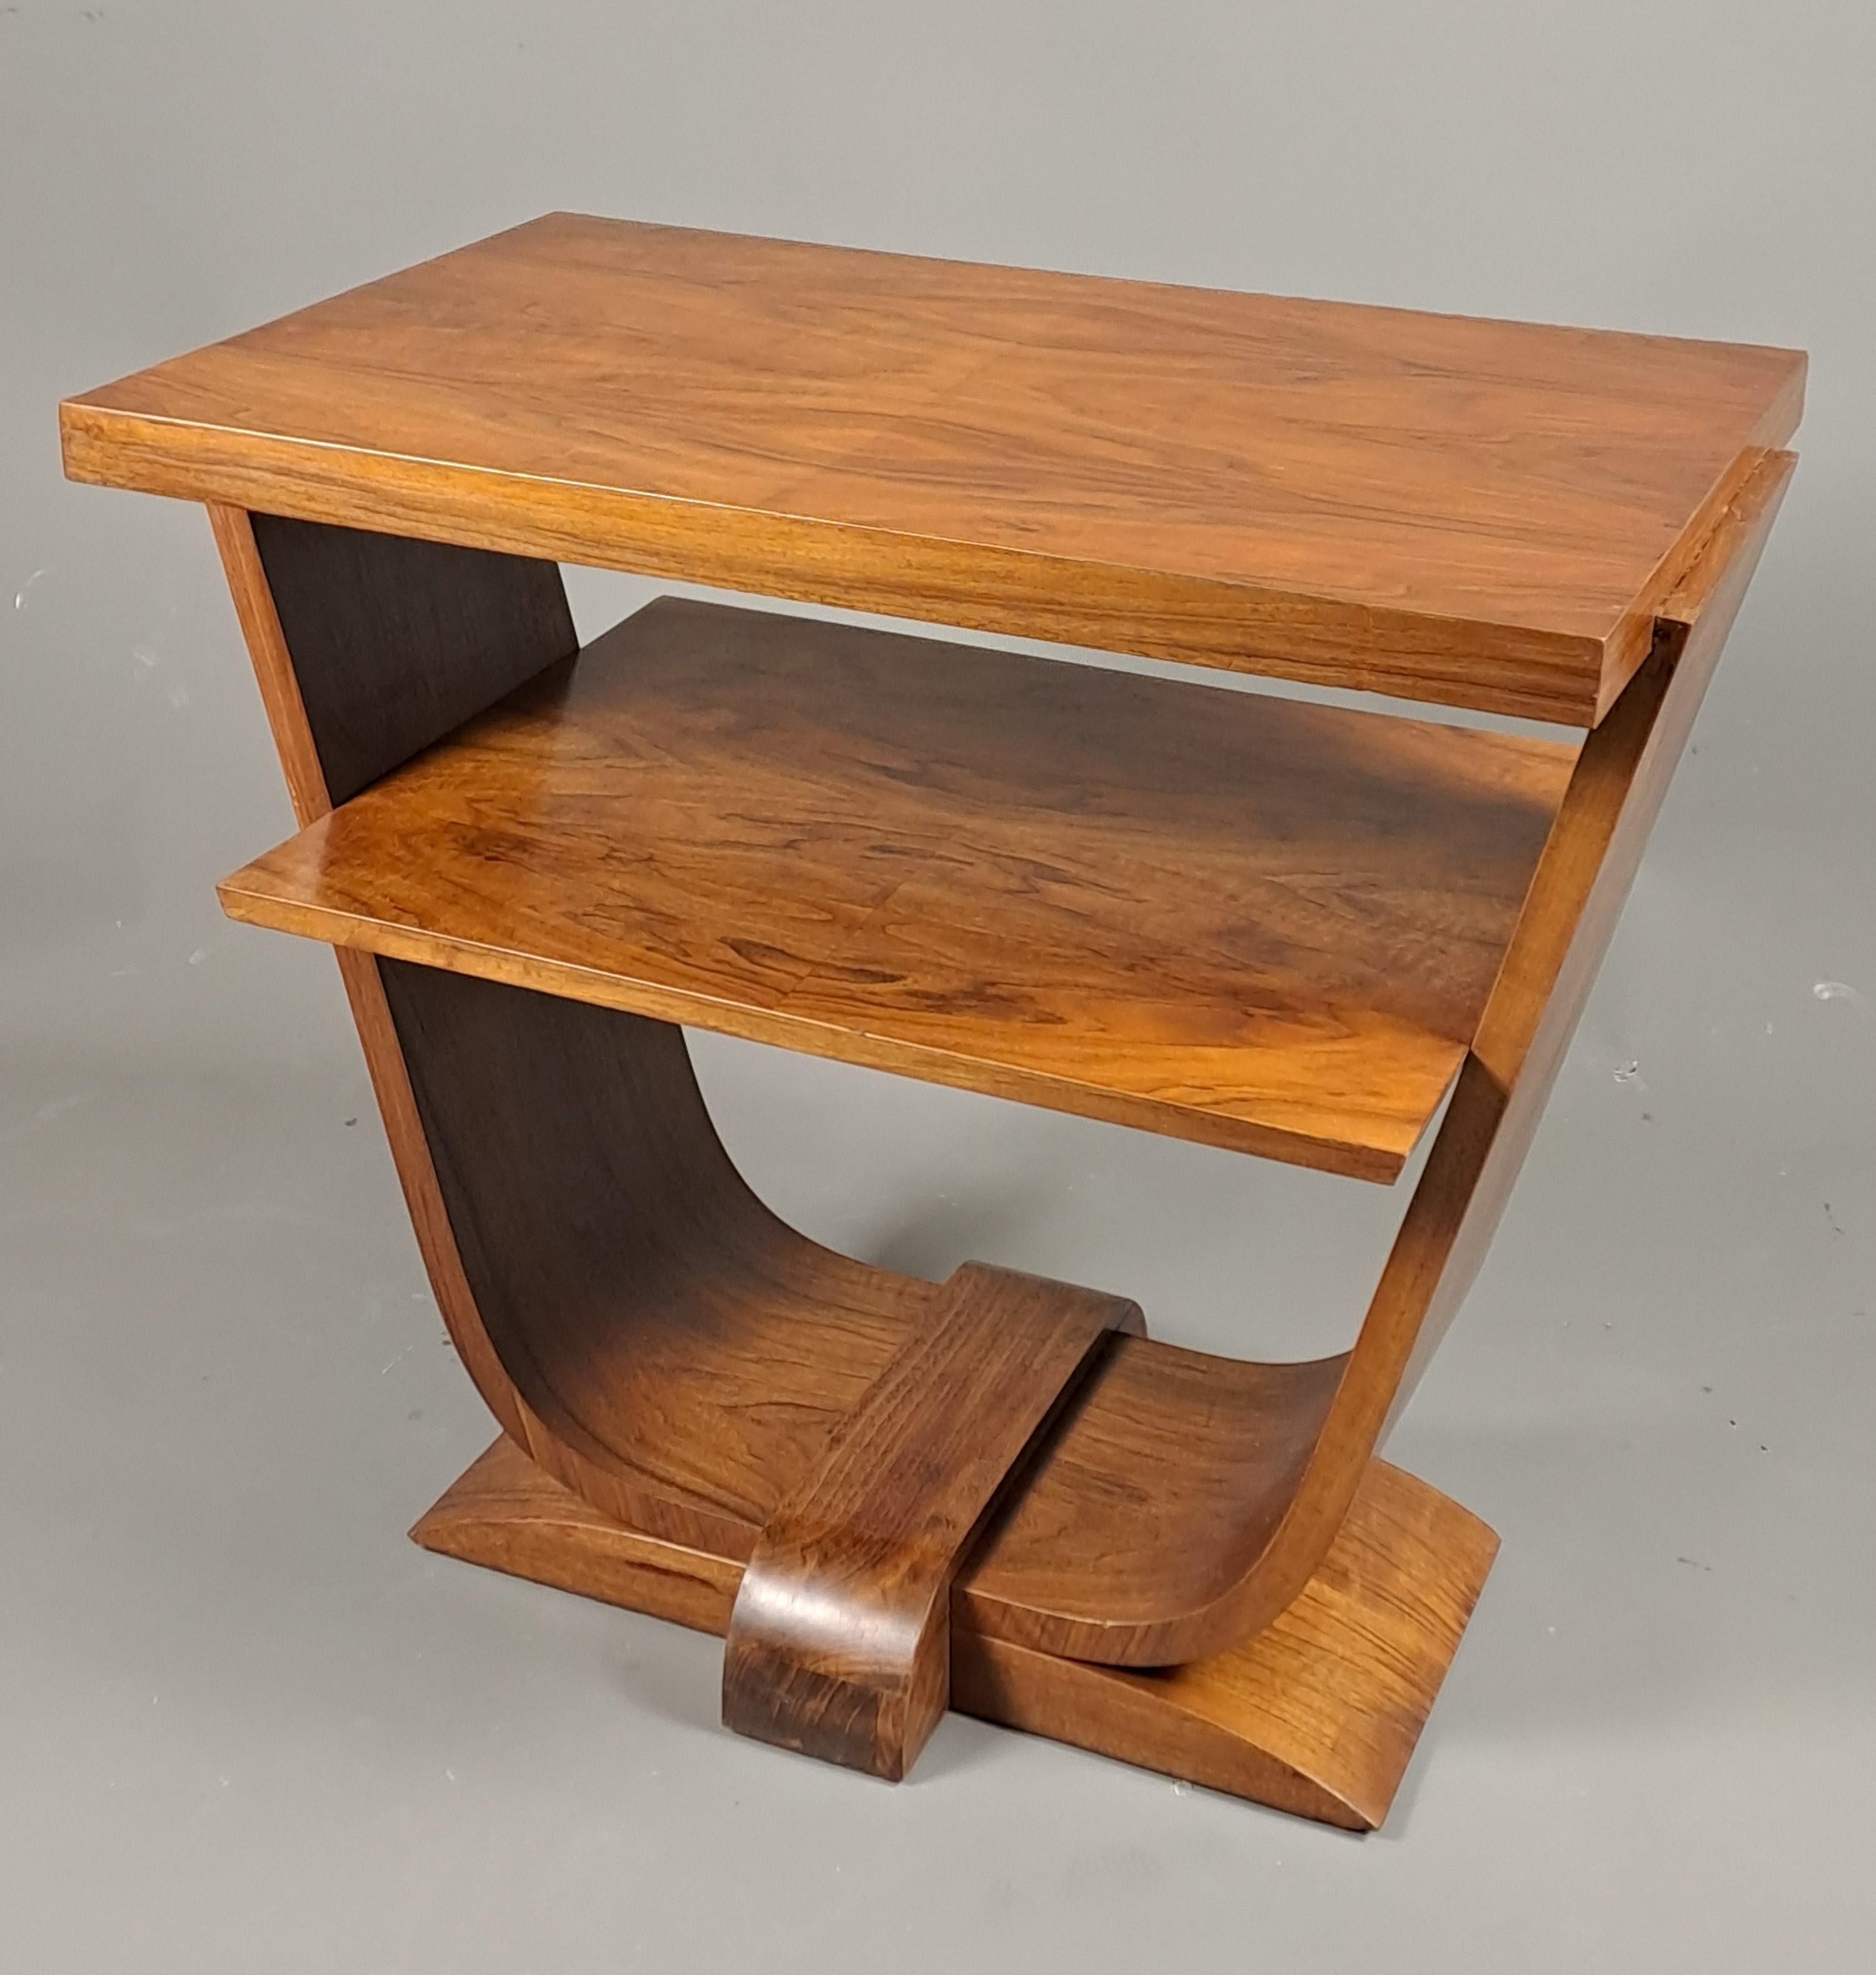 Beautiful tulip-shaped living room table with double rectangular top.
Walnut and solid walnut veneer.

Work of quality from the art deco period - circa 1940

Very good condition, refinished by our workshop